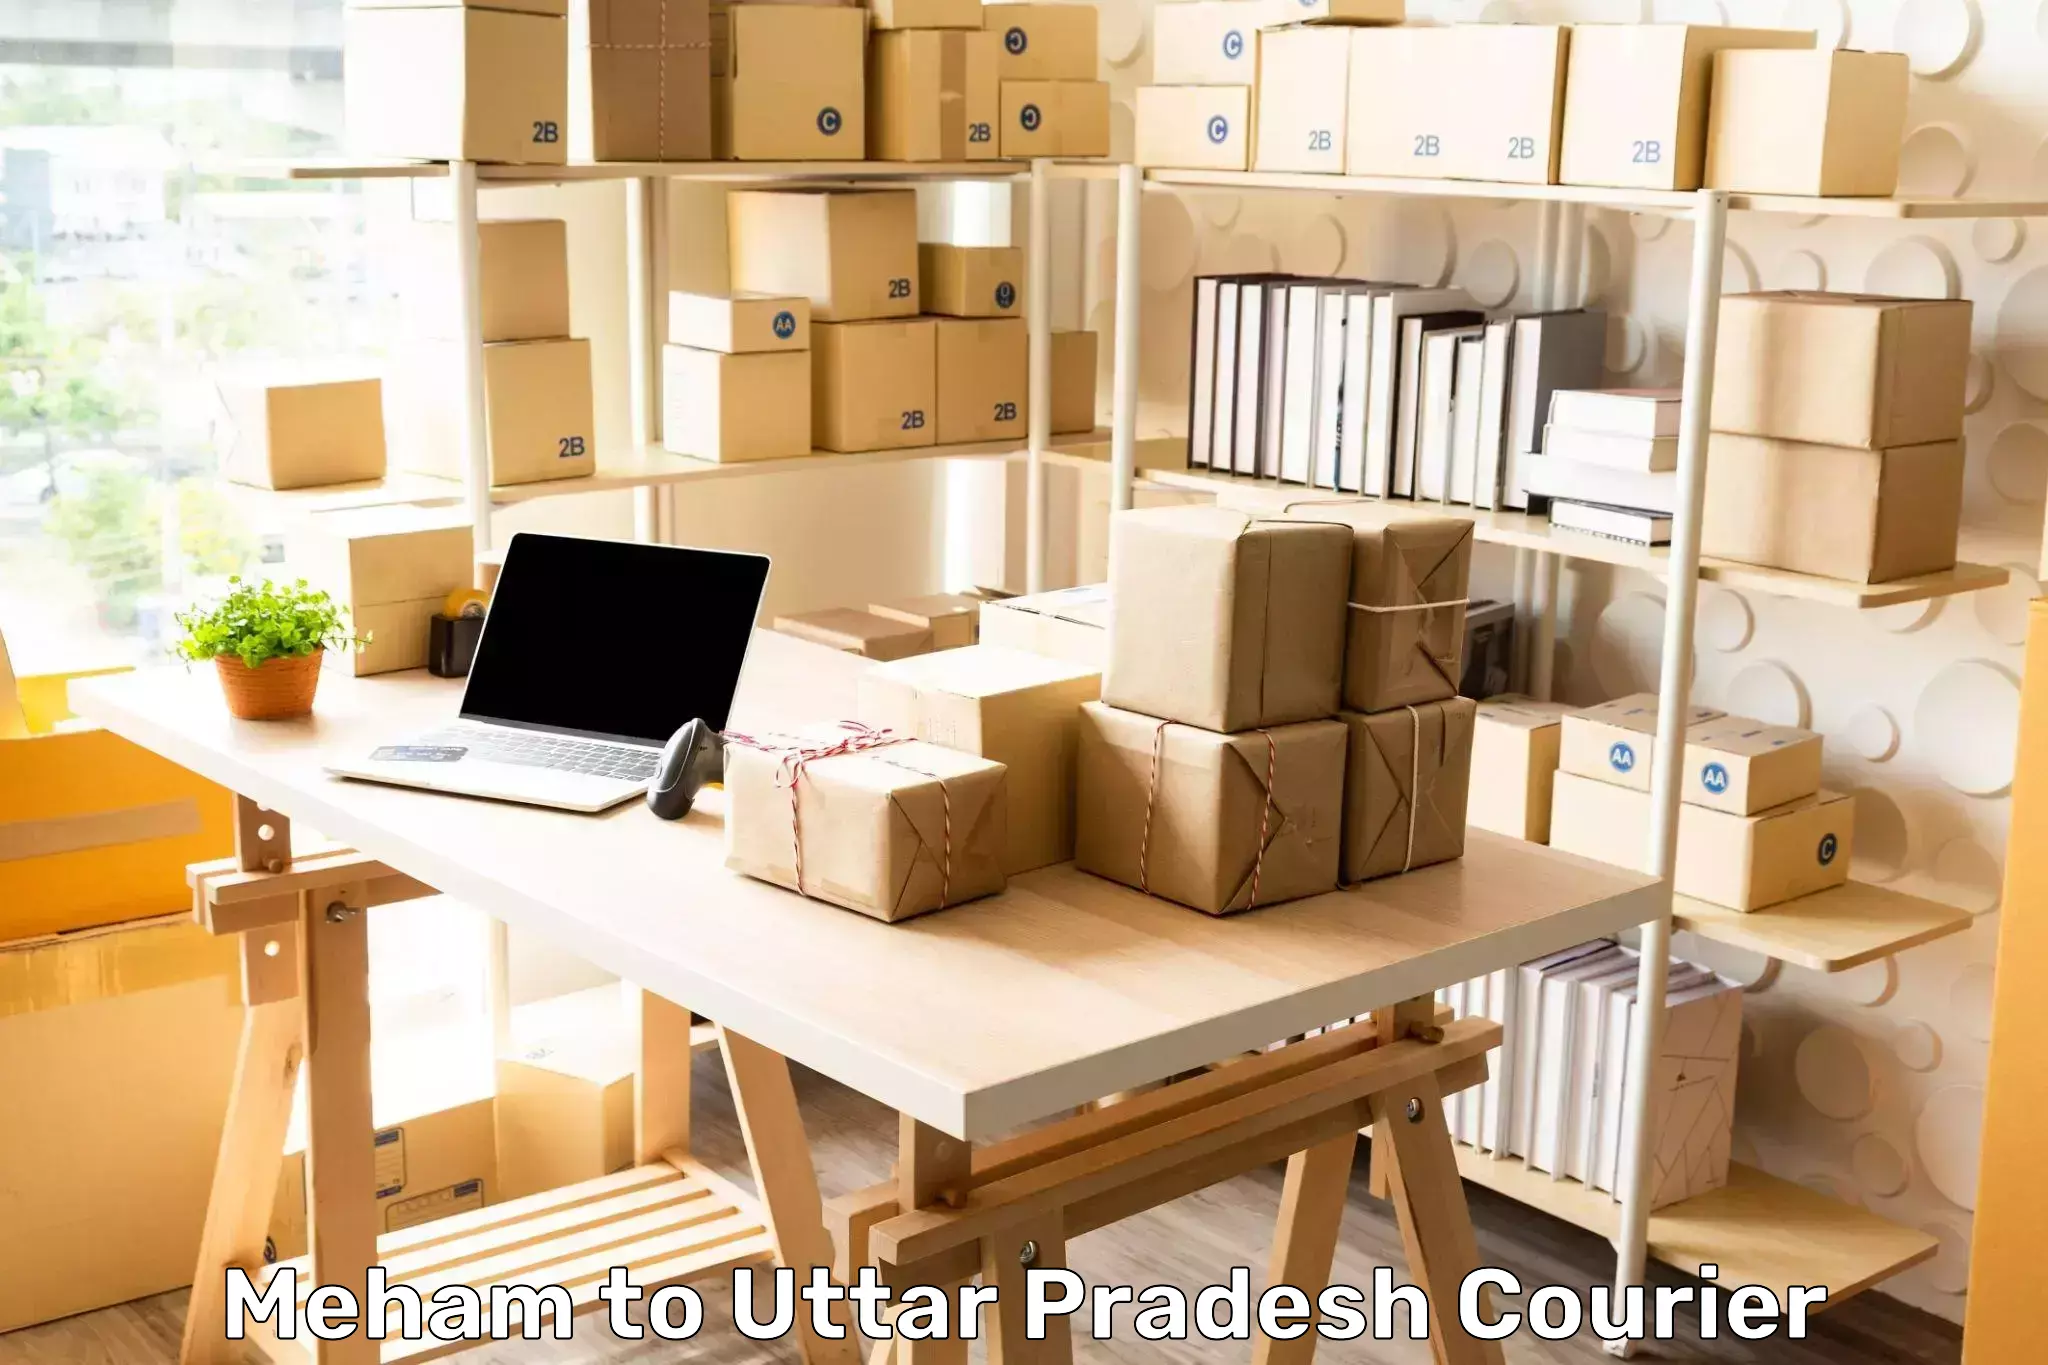 Courier service innovation Meham to Unnao